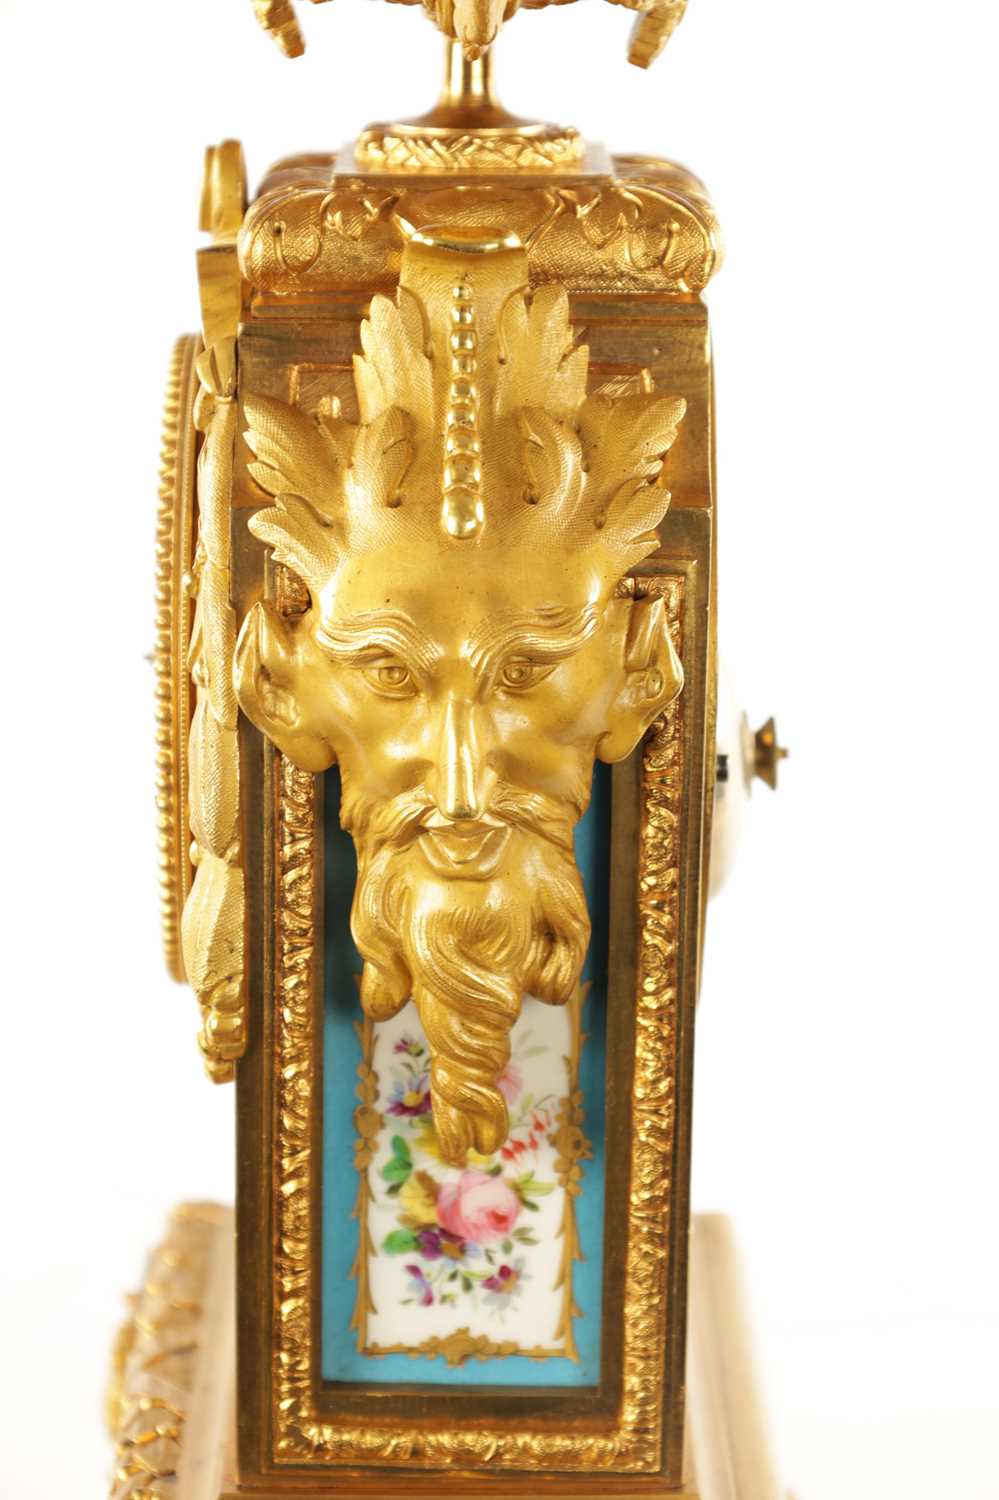 A LATE 19TH CENTURY FRENCH PORCELAIN PANELLED ORMOLU MANTEL CLOCK - Image 5 of 10